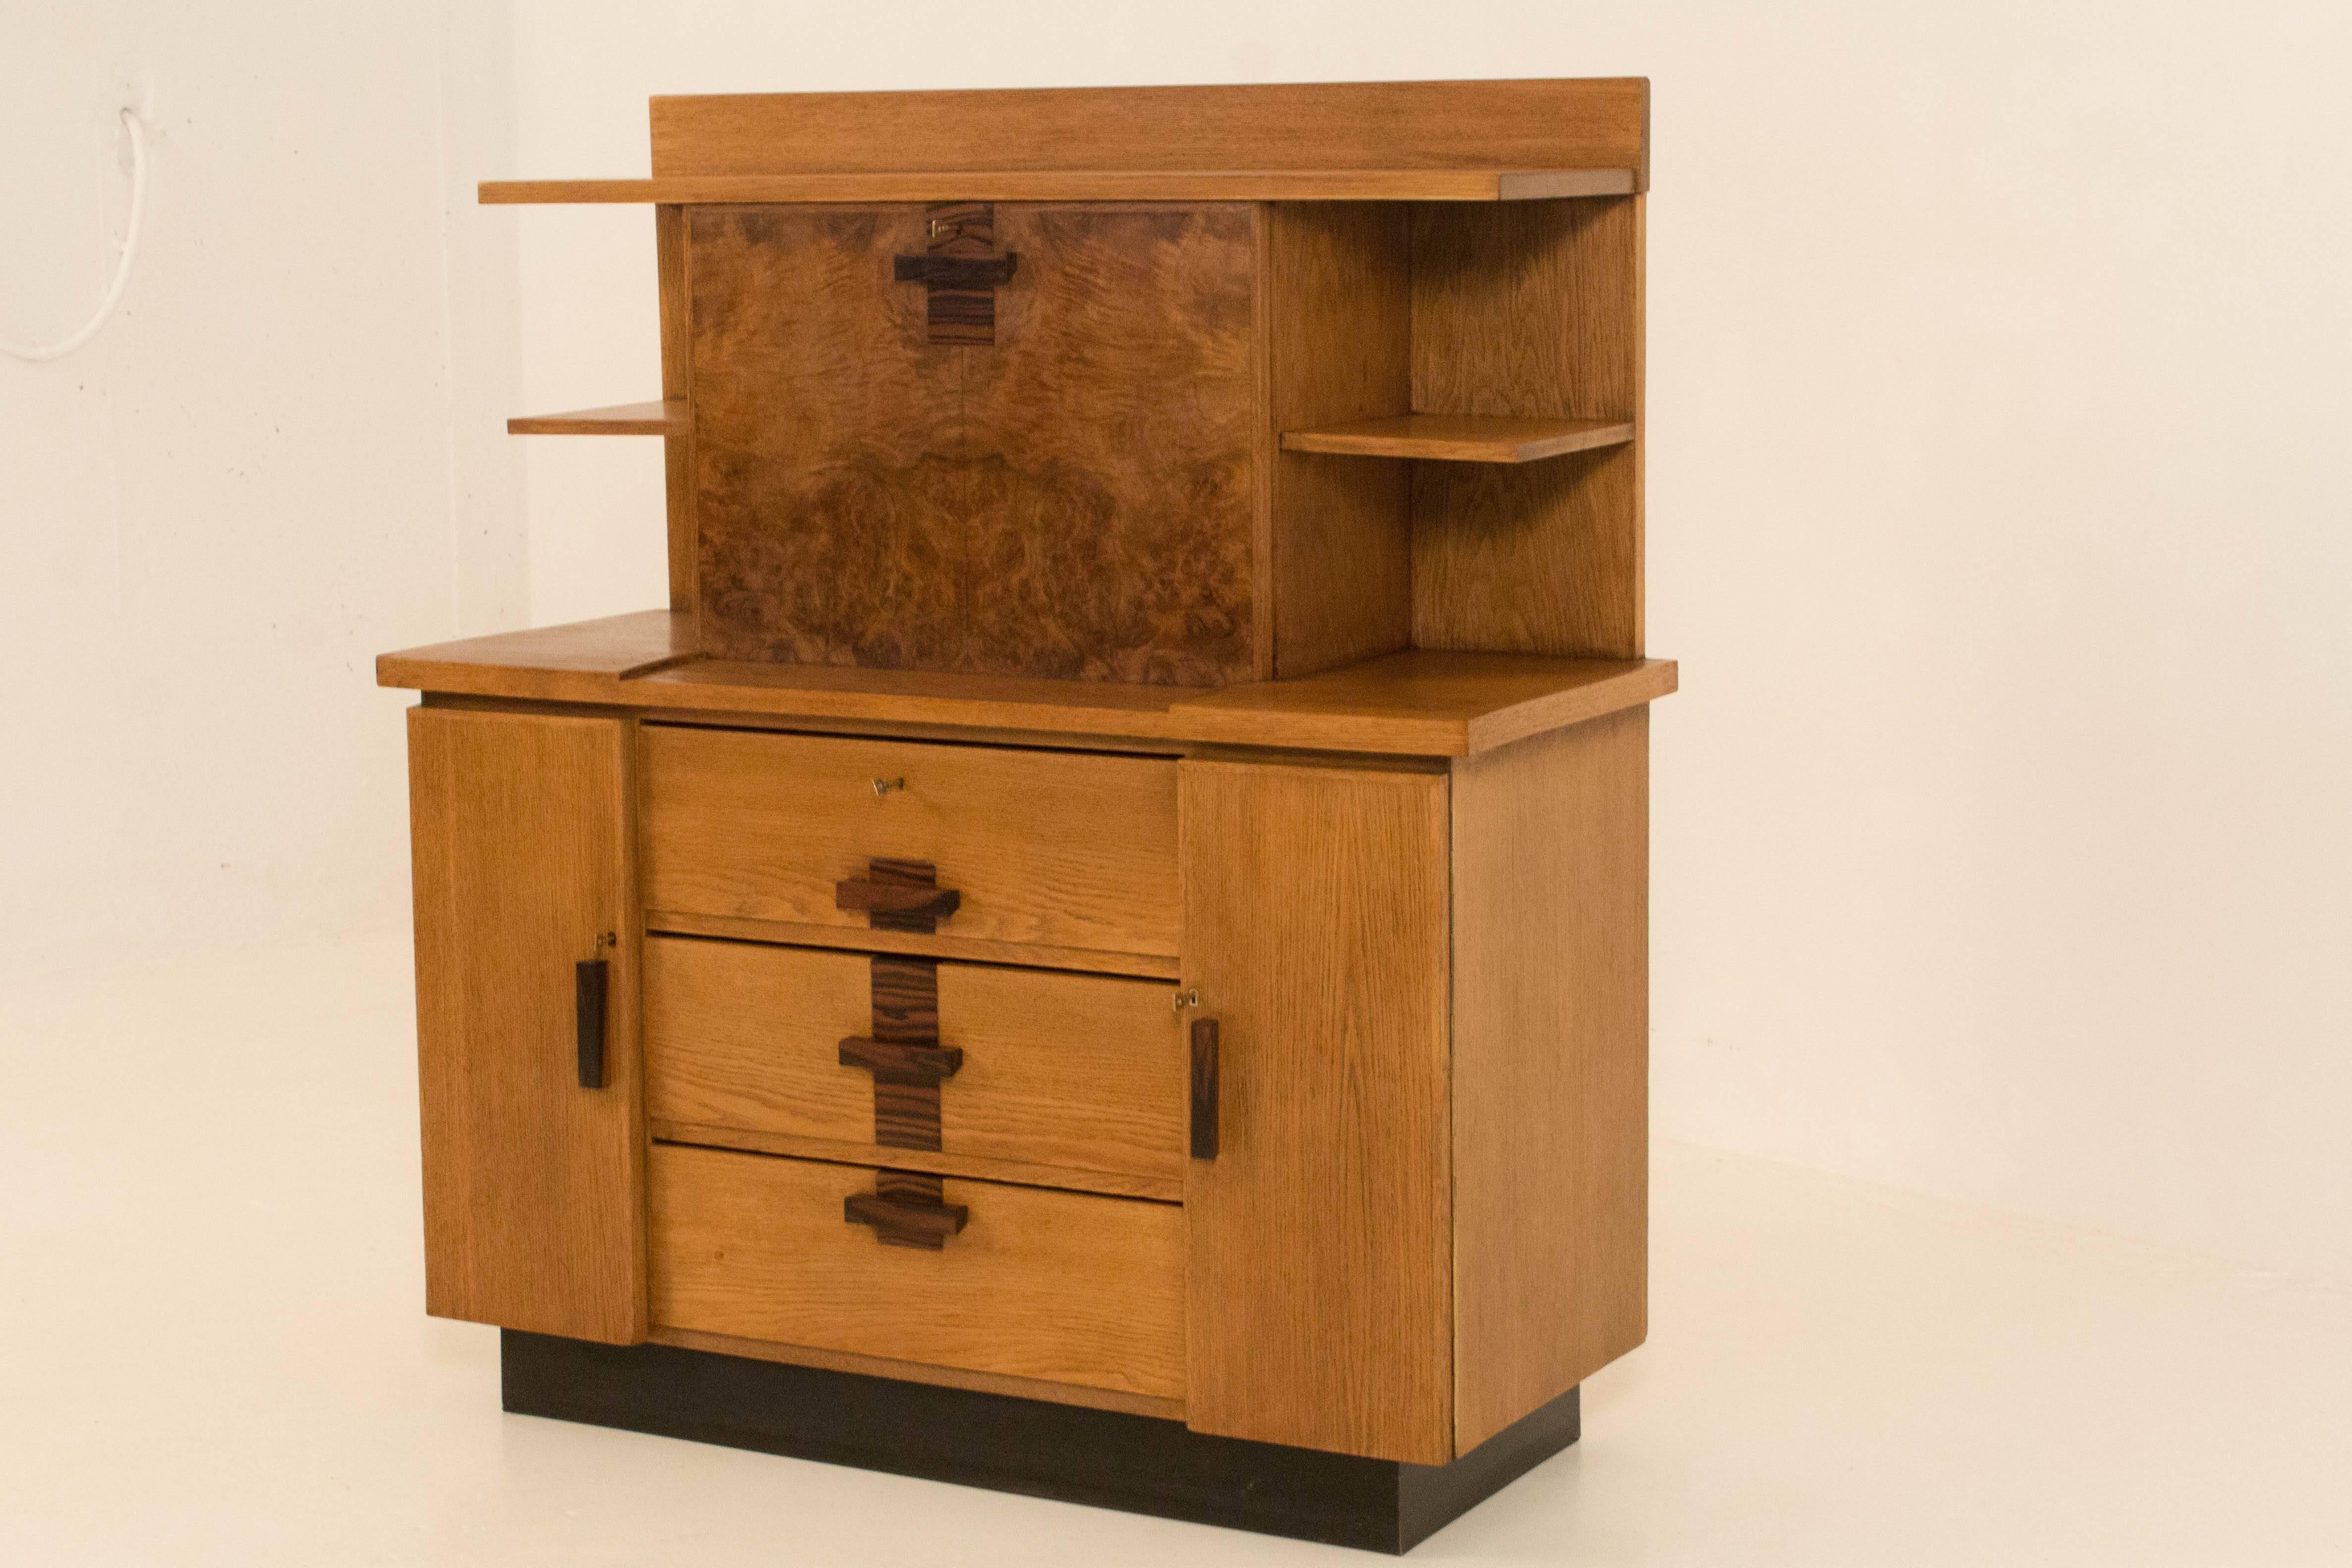 Early 20th Century Oak Art Deco Haagse School Bookcase with Drop-Front Desk by P.E.L.Izeren, 1920s